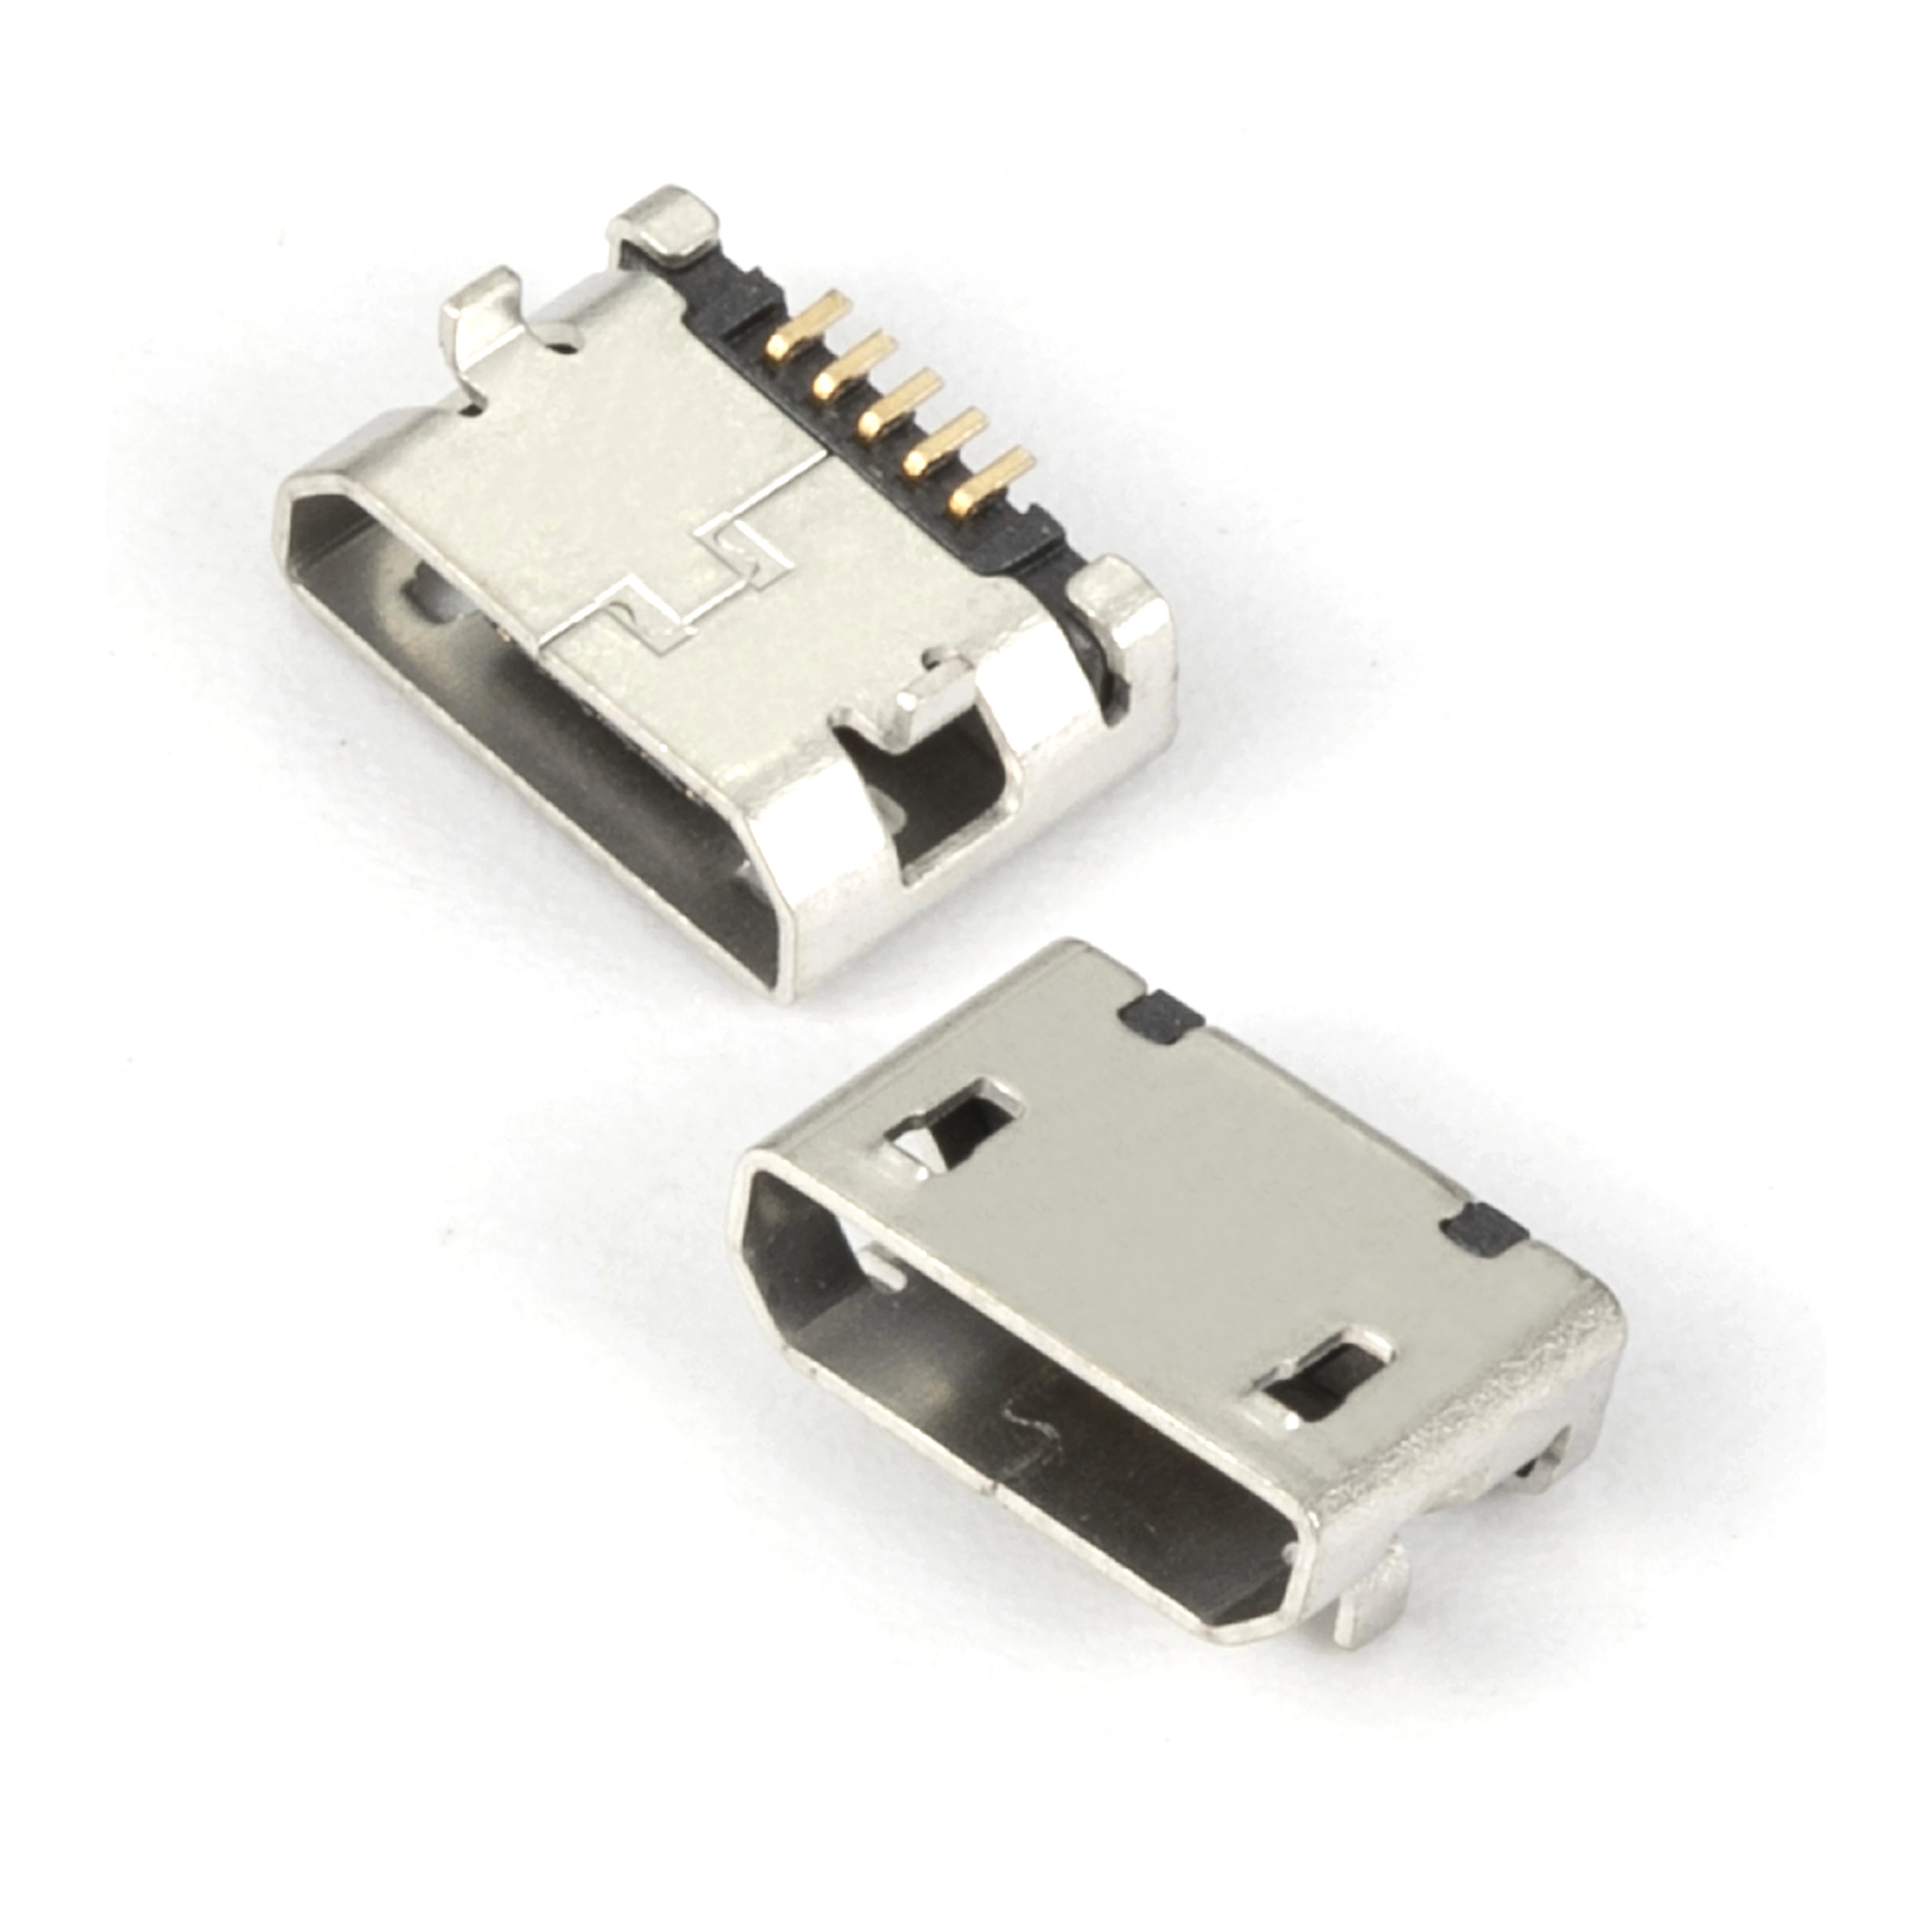 Micro USB Female Connector Mini USB Connector 5pin B Type Female Connector for Mobile Phone